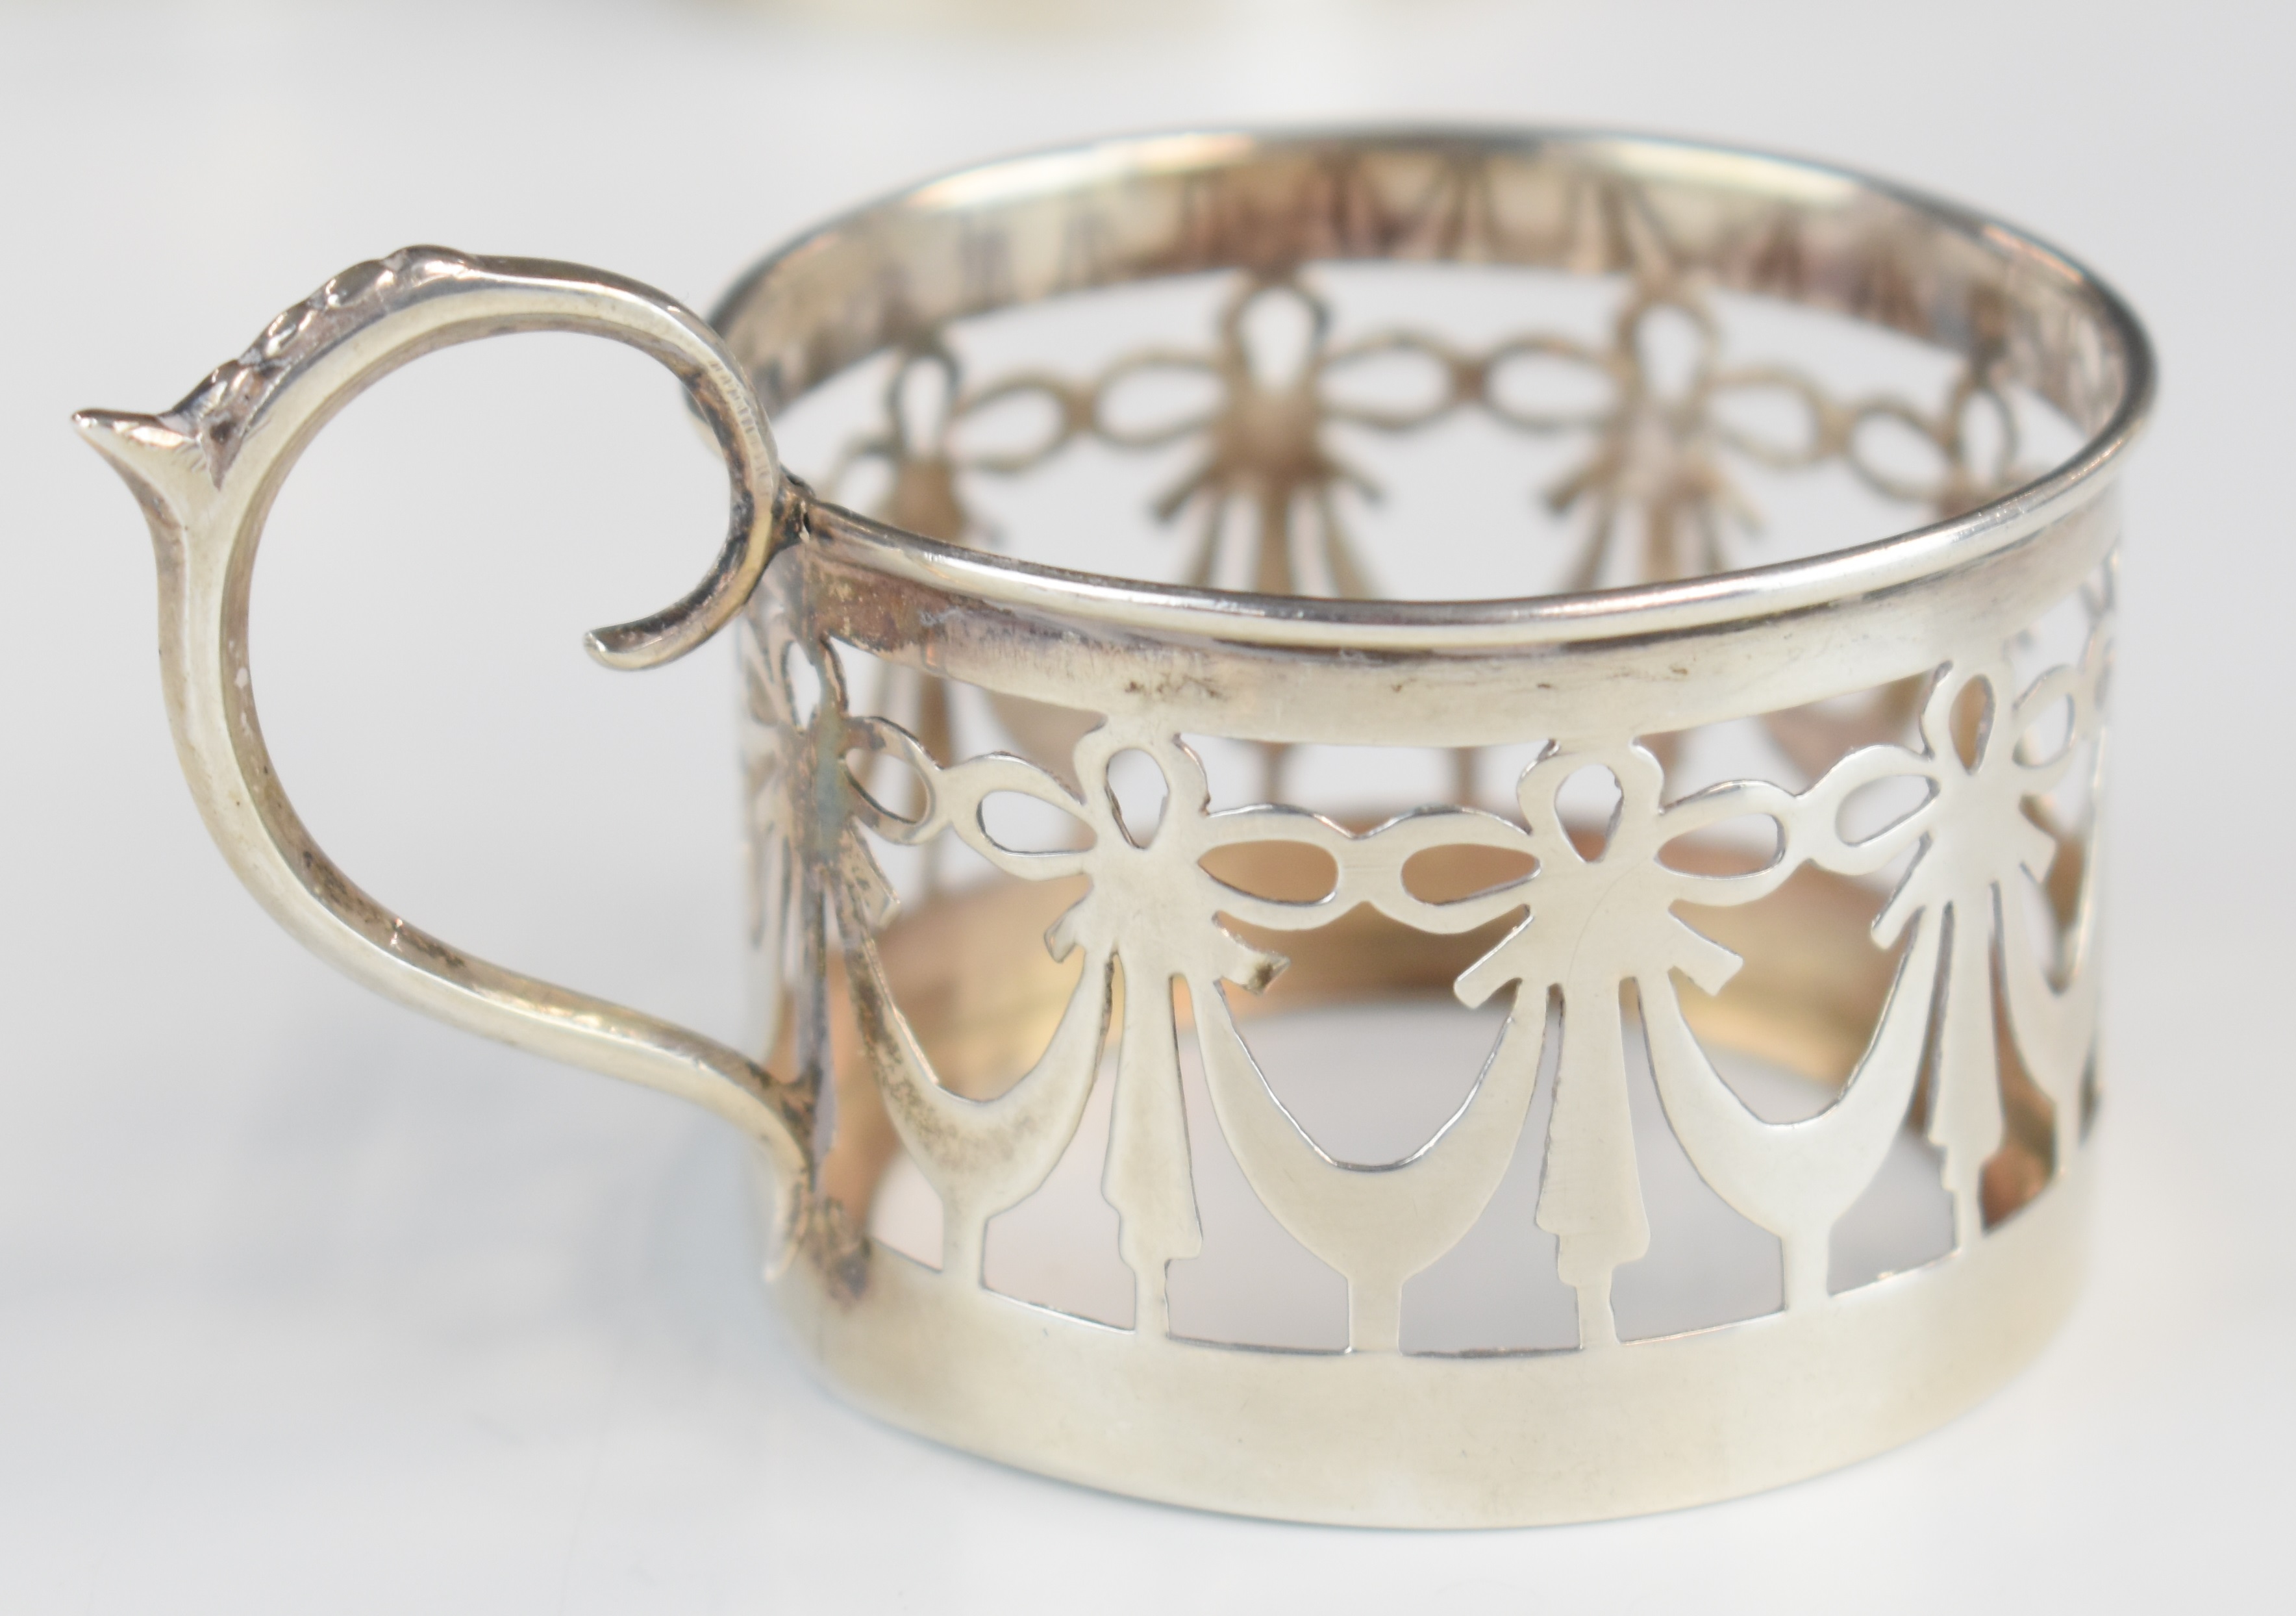 Set of three George V hallmarked silver cup or glass holders with pierced decoration, Birmingham - Image 2 of 3